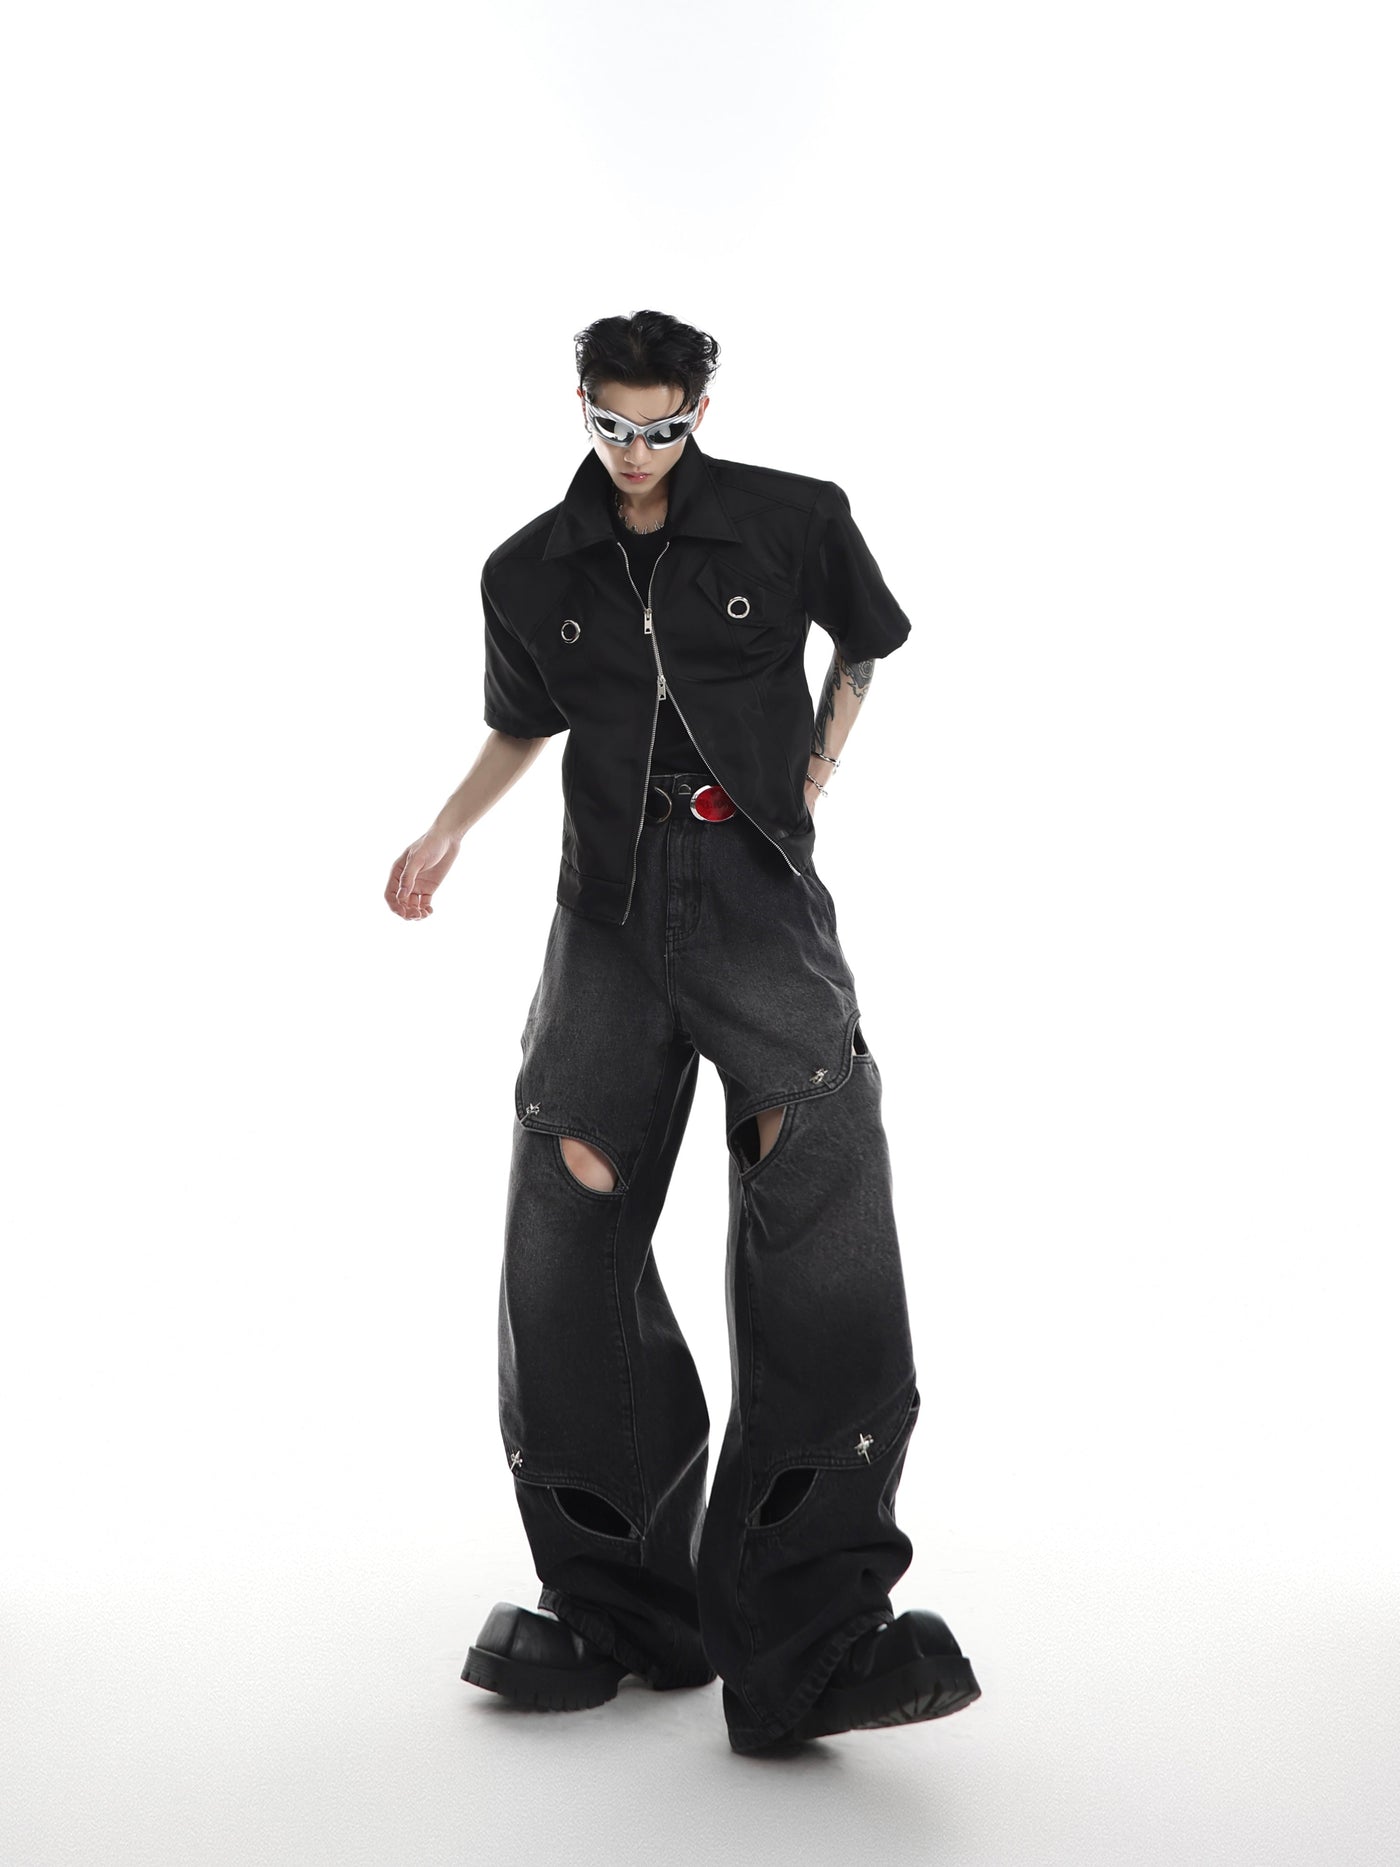 Washed Metal Buttoned Hollow Jeans Korean Street Fashion Jeans By Argue Culture Shop Online at OH Vault